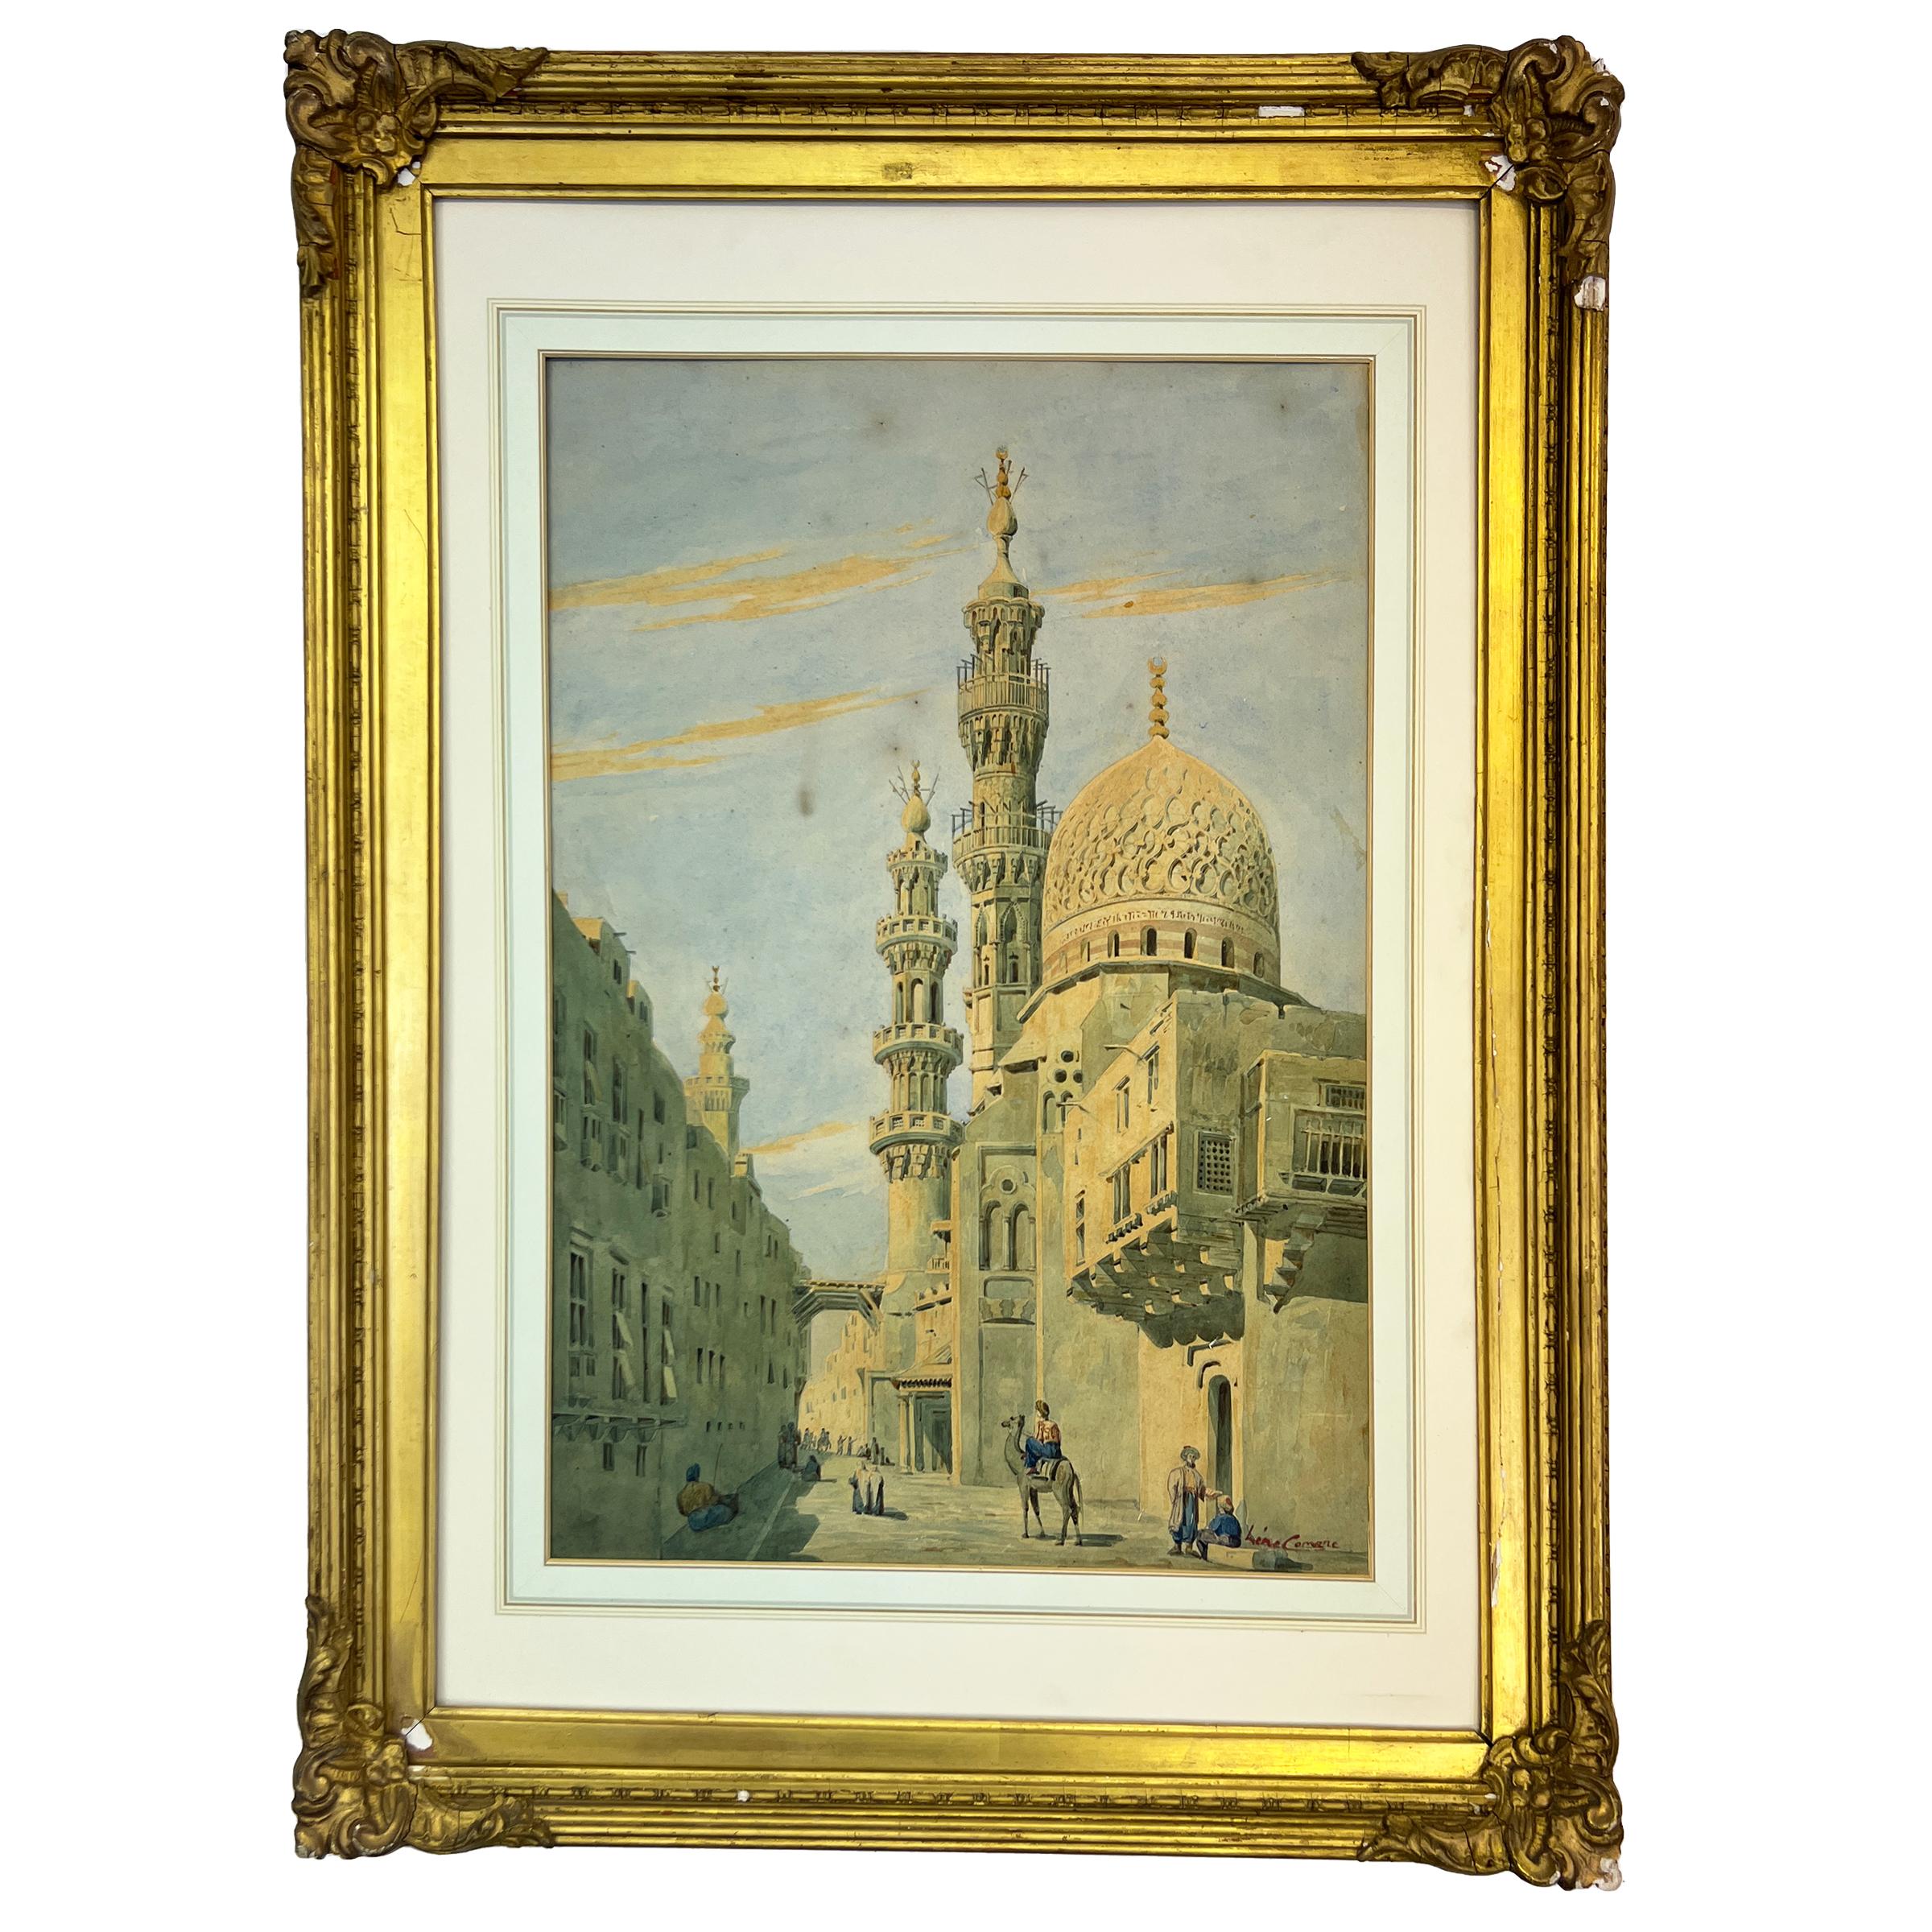 Set within gilt-wood frame, paper watercolour painting signed lower right, depicts north African street, domes, minarets and people.